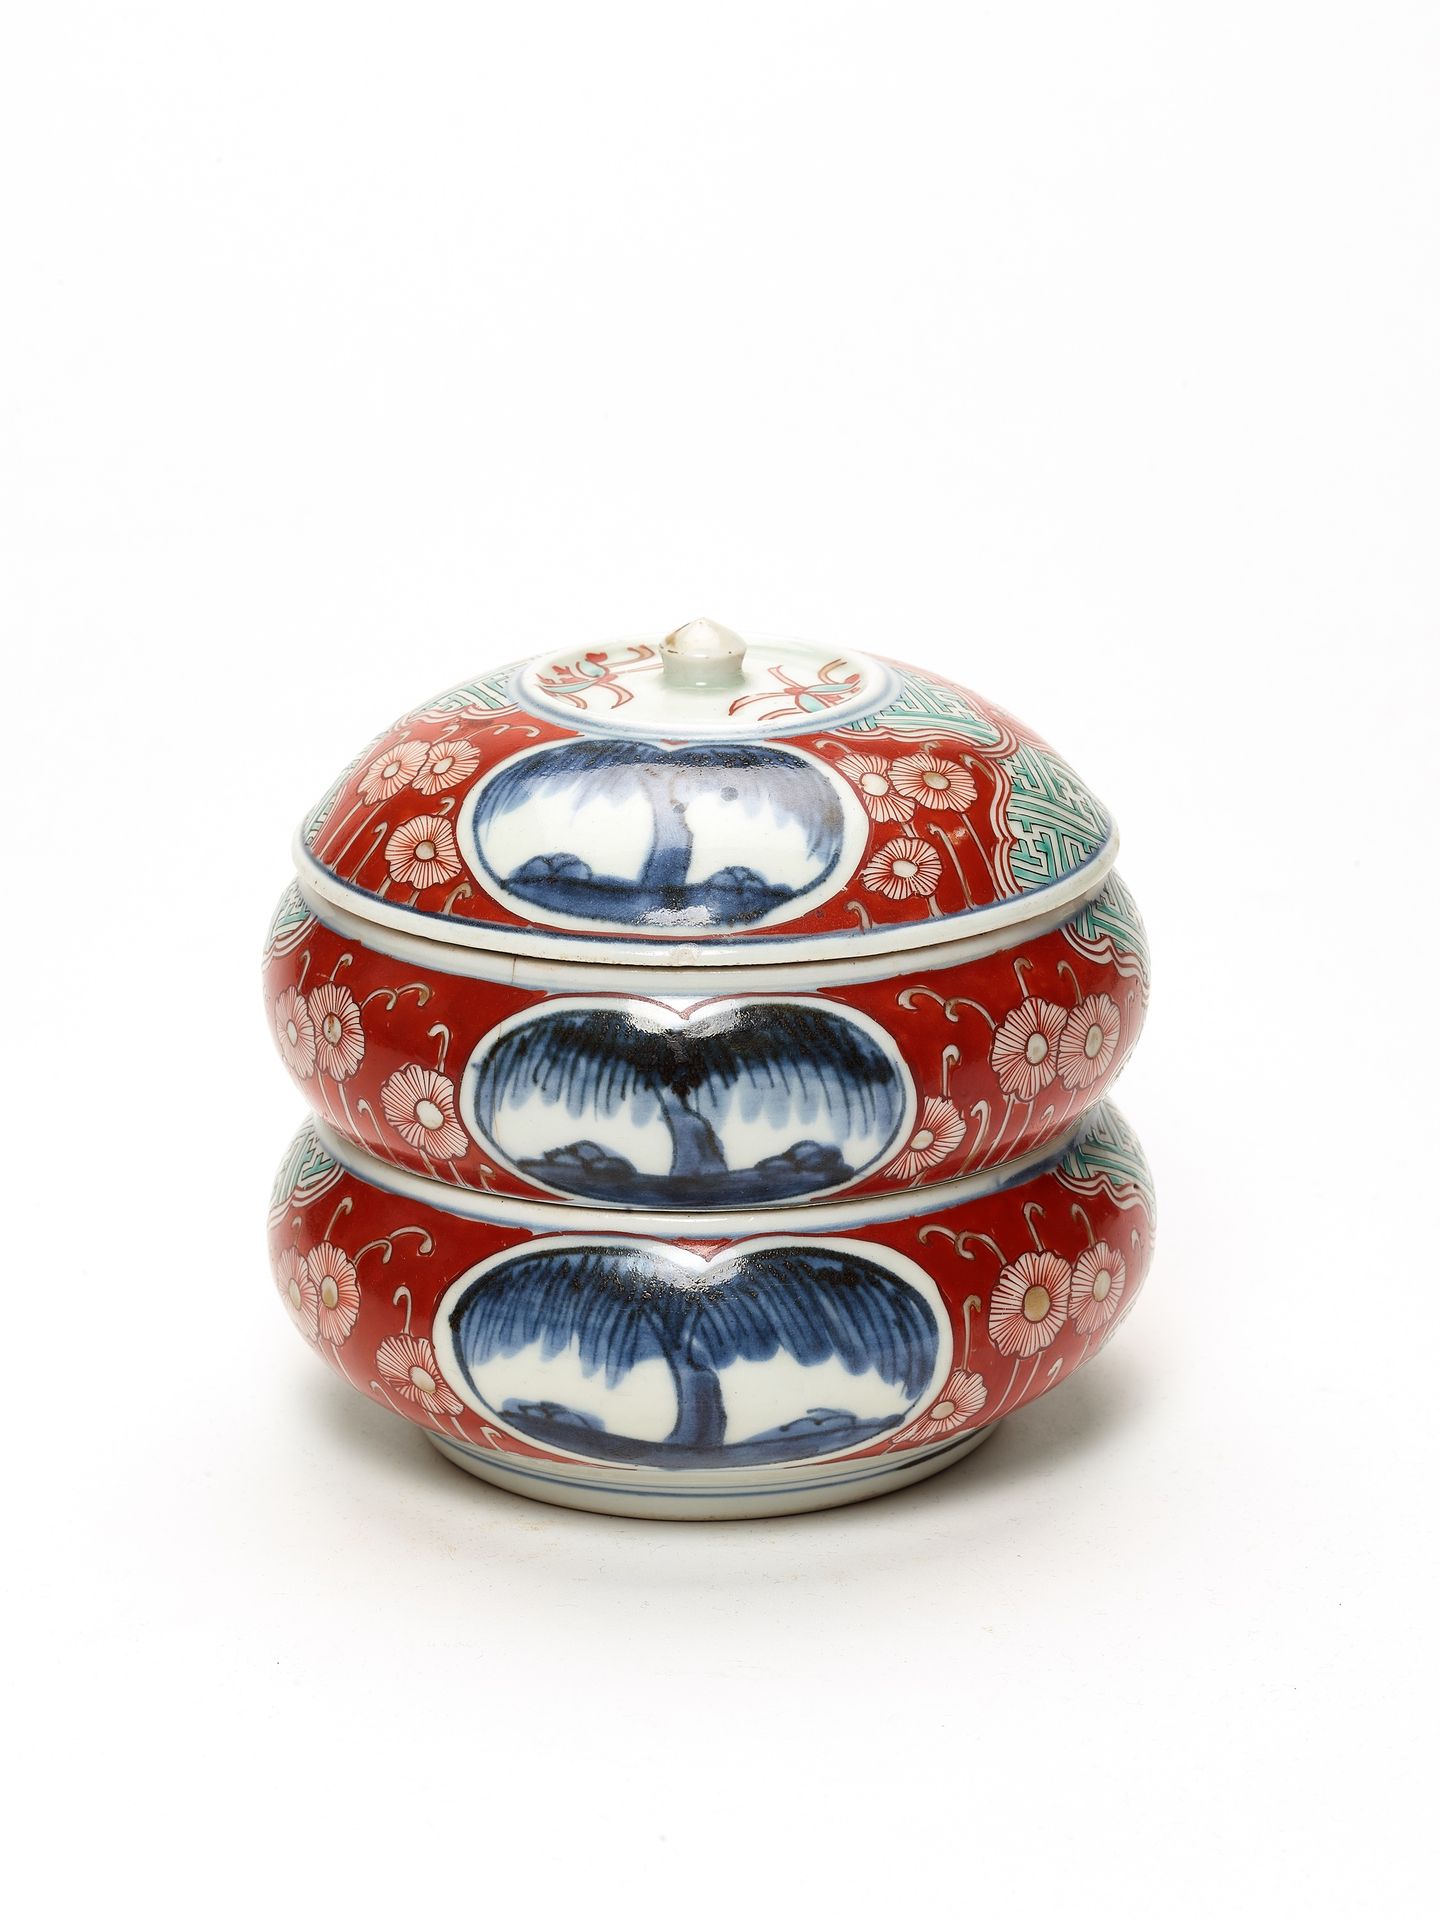 A FINELY PAINTED IMARI THREE-CASE BOX WITH COVER 精致的伊万里画三箱盒
日本，明治时期（1868-1912）

&hellip;